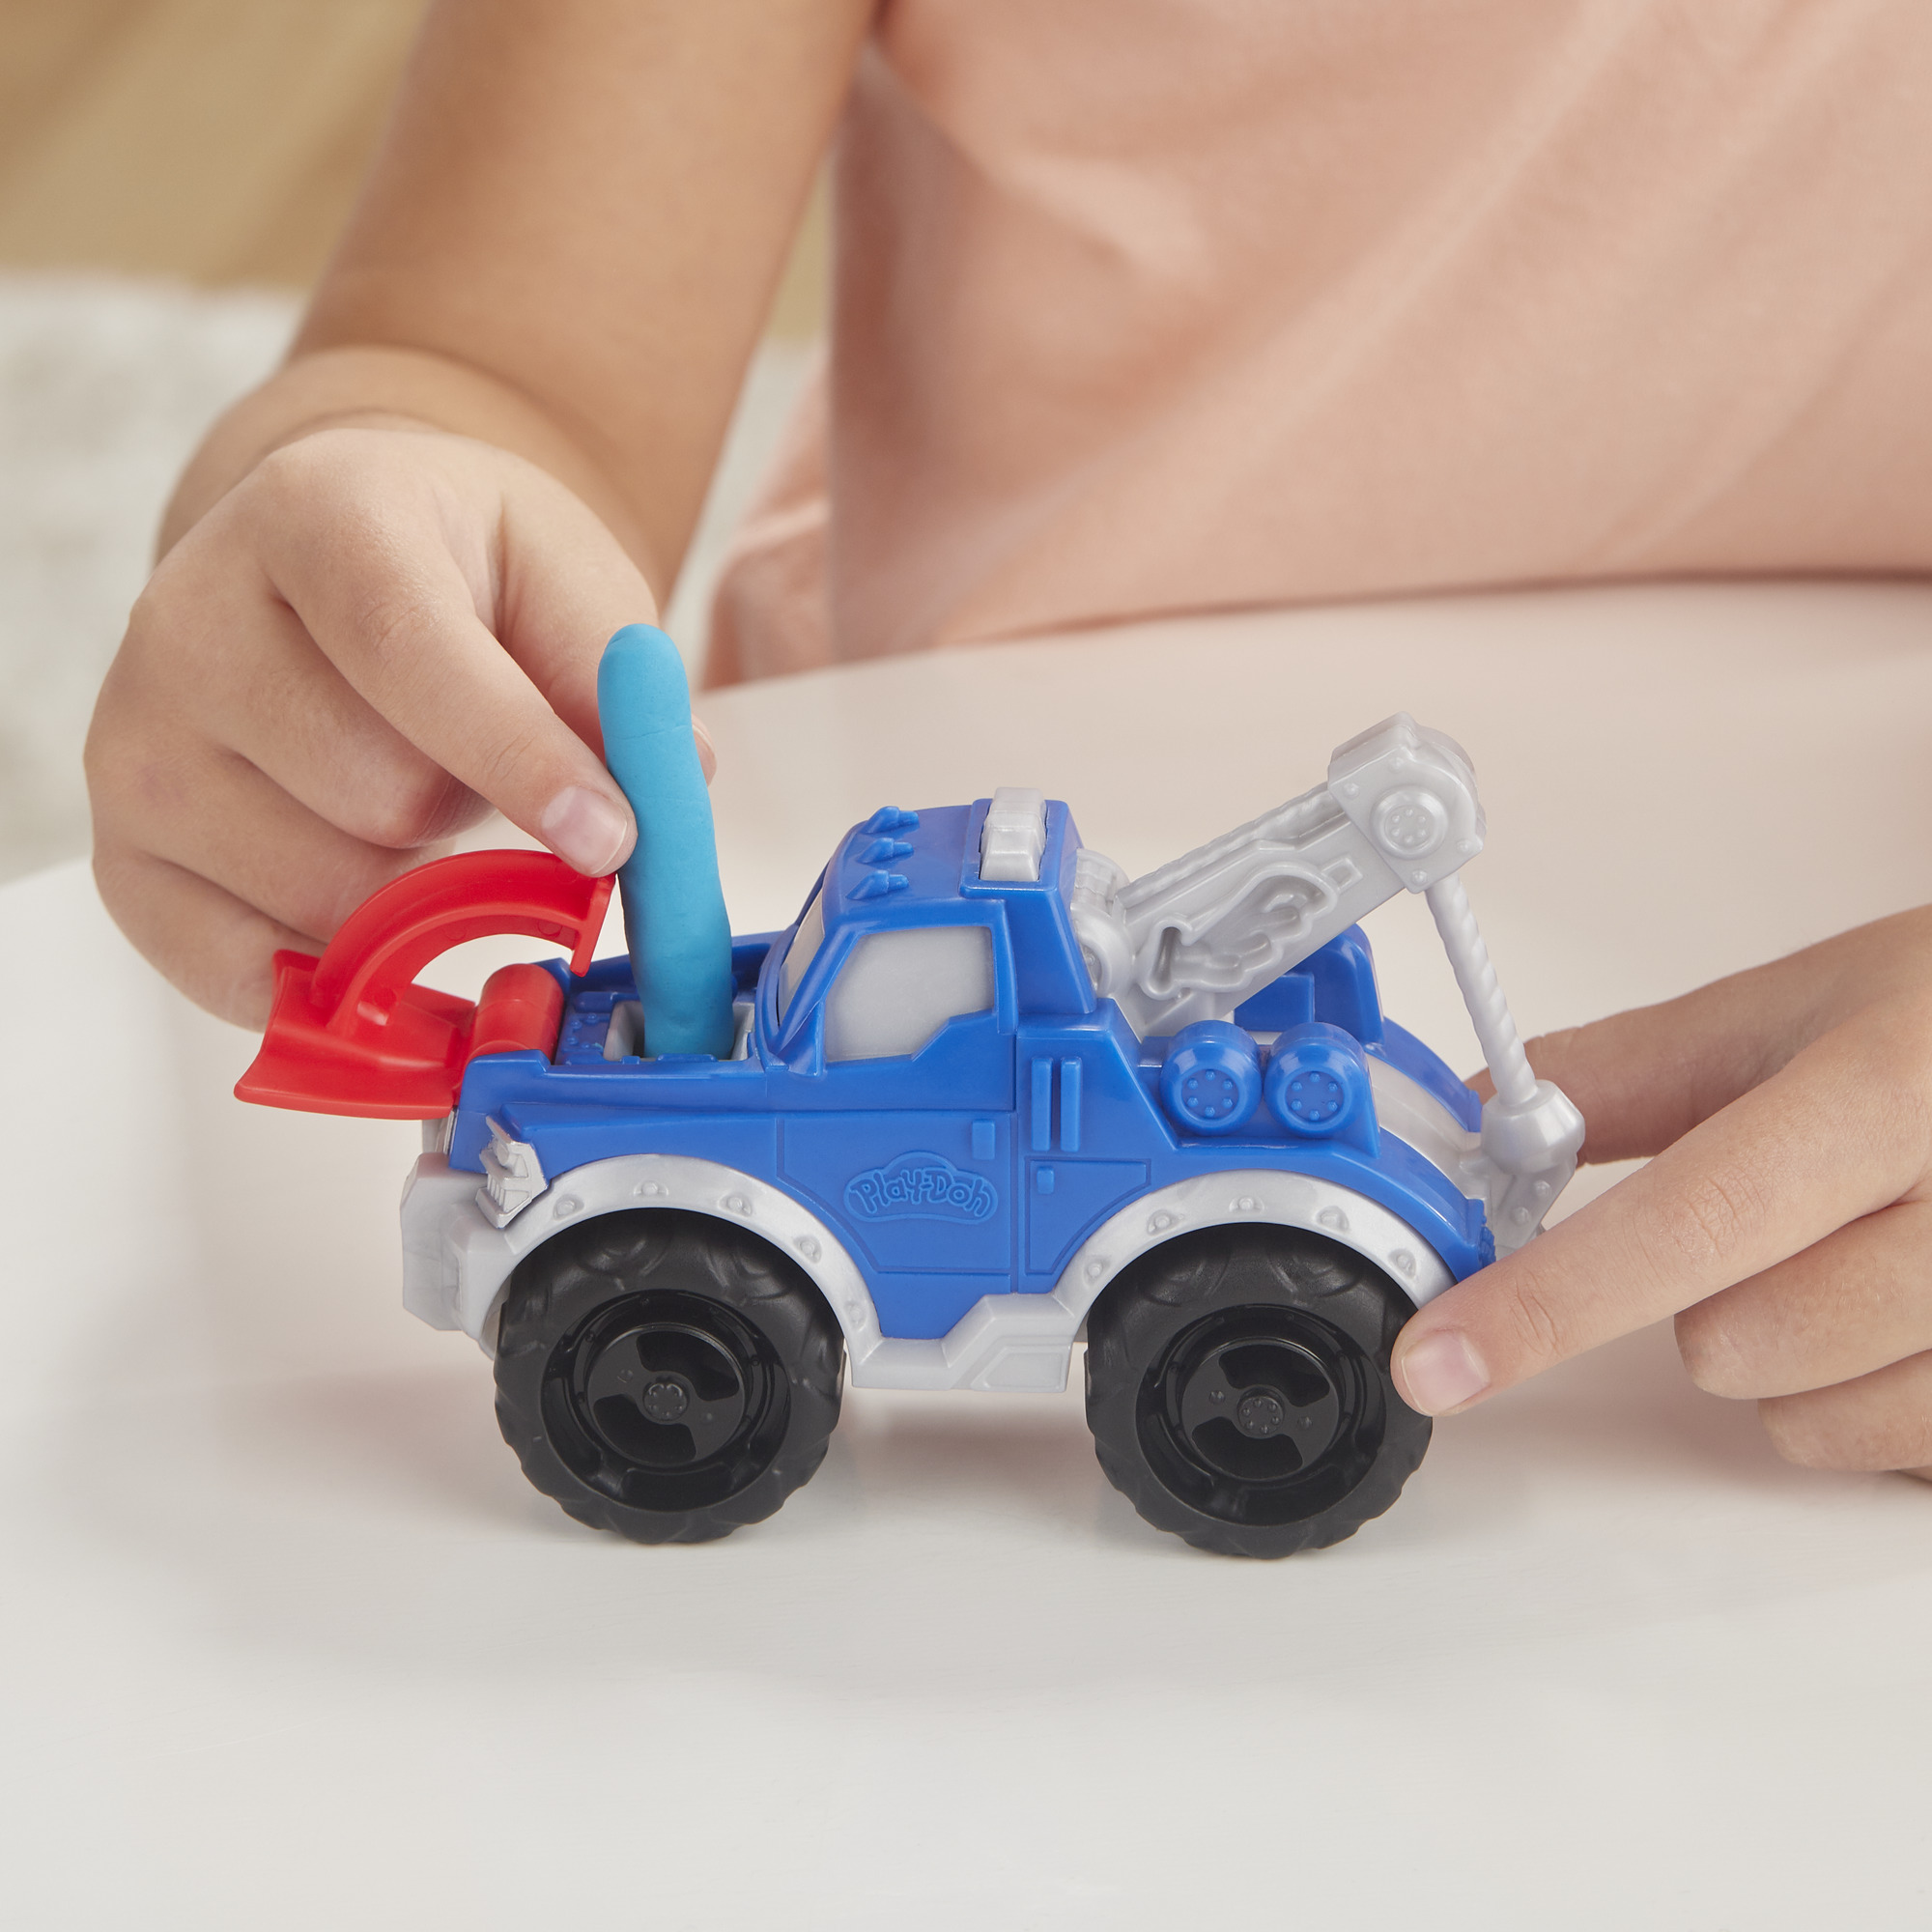 Play-Doh Wheels Tow Truck Toy with 3 Non-Toxic Play-Doh Colors, (6 oz) - image 11 of 14